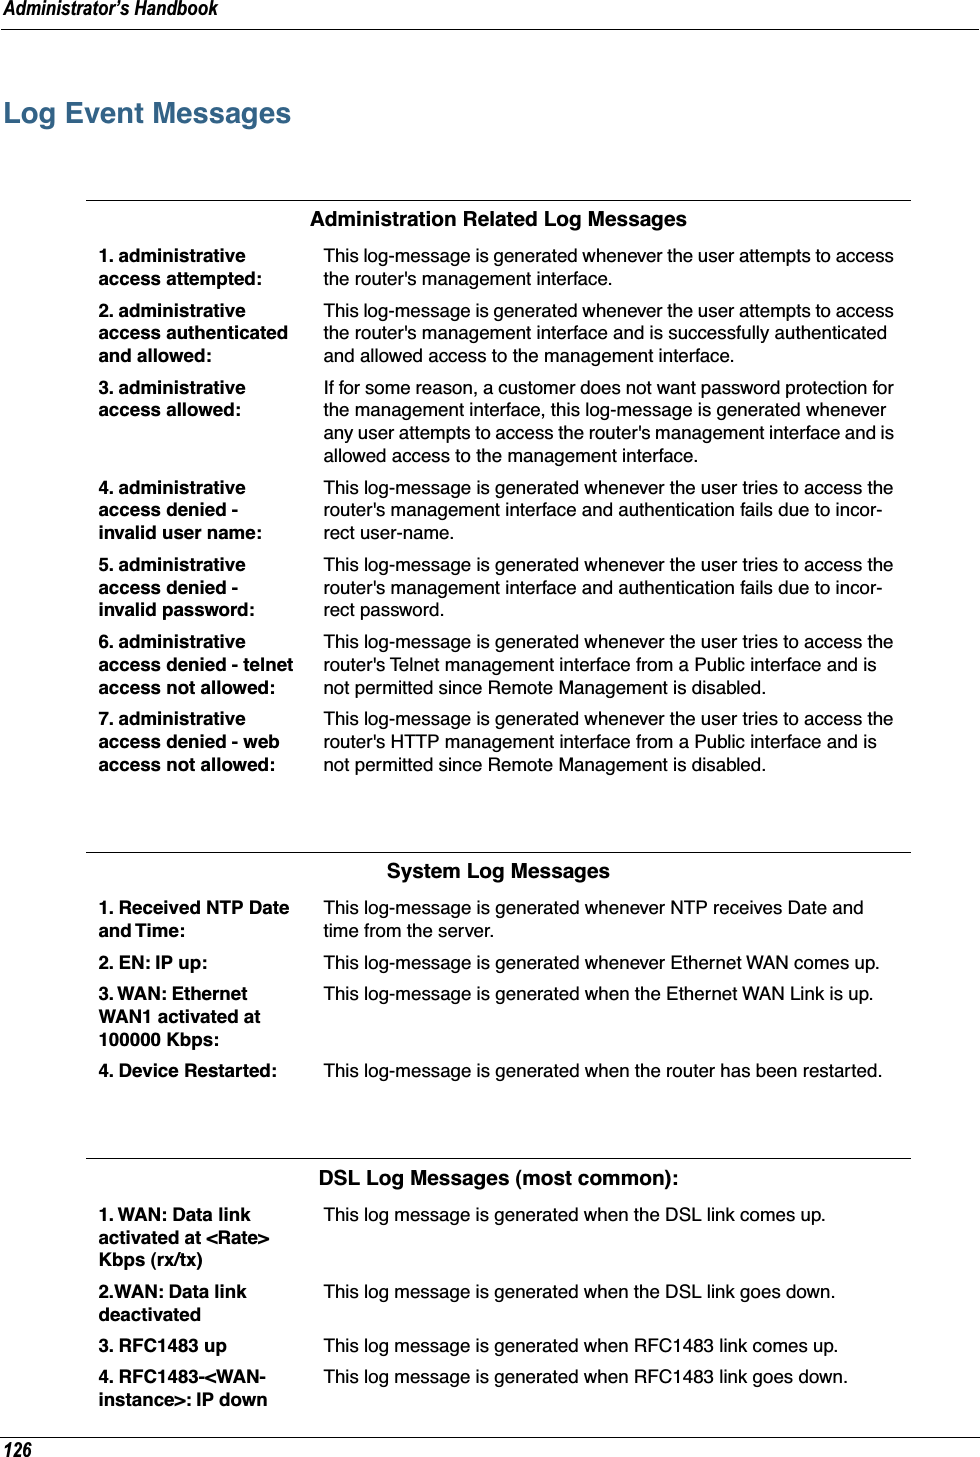 Administrator’s Handbook126Log Event MessagesAdministration Related Log Messages1. administrative access attempted:This log-message is generated whenever the user attempts to access the router&apos;s management interface.2. administrative access authenticated and allowed:This log-message is generated whenever the user attempts to access the router&apos;s management interface and is successfully authenticated and allowed access to the management interface.3. administrative access allowed:If for some reason, a customer does not want password protection for the management interface, this log-message is generated whenever any user attempts to access the router&apos;s management interface and is allowed access to the management interface.4. administrative access denied - invalid user name:This log-message is generated whenever the user tries to access the router&apos;s management interface and authentication fails due to incor-rect user-name.5. administrative access denied - invalid password:This log-message is generated whenever the user tries to access the router&apos;s management interface and authentication fails due to incor-rect password.6. administrative access denied - telnet access not allowed:This log-message is generated whenever the user tries to access the router&apos;s Telnet management interface from a Public interface and is not permitted since Remote Management is disabled.7. administrative access denied - web access not allowed:This log-message is generated whenever the user tries to access the router&apos;s HTTP management interface from a Public interface and is not permitted since Remote Management is disabled.System Log Messages1. Received NTP Date and Time:This log-message is generated whenever NTP receives Date and time from the server.2. EN: IP up: This log-message is generated whenever Ethernet WAN comes up.3. WAN: Ethernet WAN1 activated at 100000 Kbps:This log-message is generated when the Ethernet WAN Link is up.4. Device Restarted: This log-message is generated when the router has been restarted.DSL Log Messages (most common):1. WAN: Data link activated at &lt;Rate&gt; Kbps (rx/tx)This log message is generated when the DSL link comes up.2.WAN: Data link deactivatedThis log message is generated when the DSL link goes down.3. RFC1483 up This log message is generated when RFC1483 link comes up.4. RFC1483-&lt;WAN-instance&gt;: IP downThis log message is generated when RFC1483 link goes down.